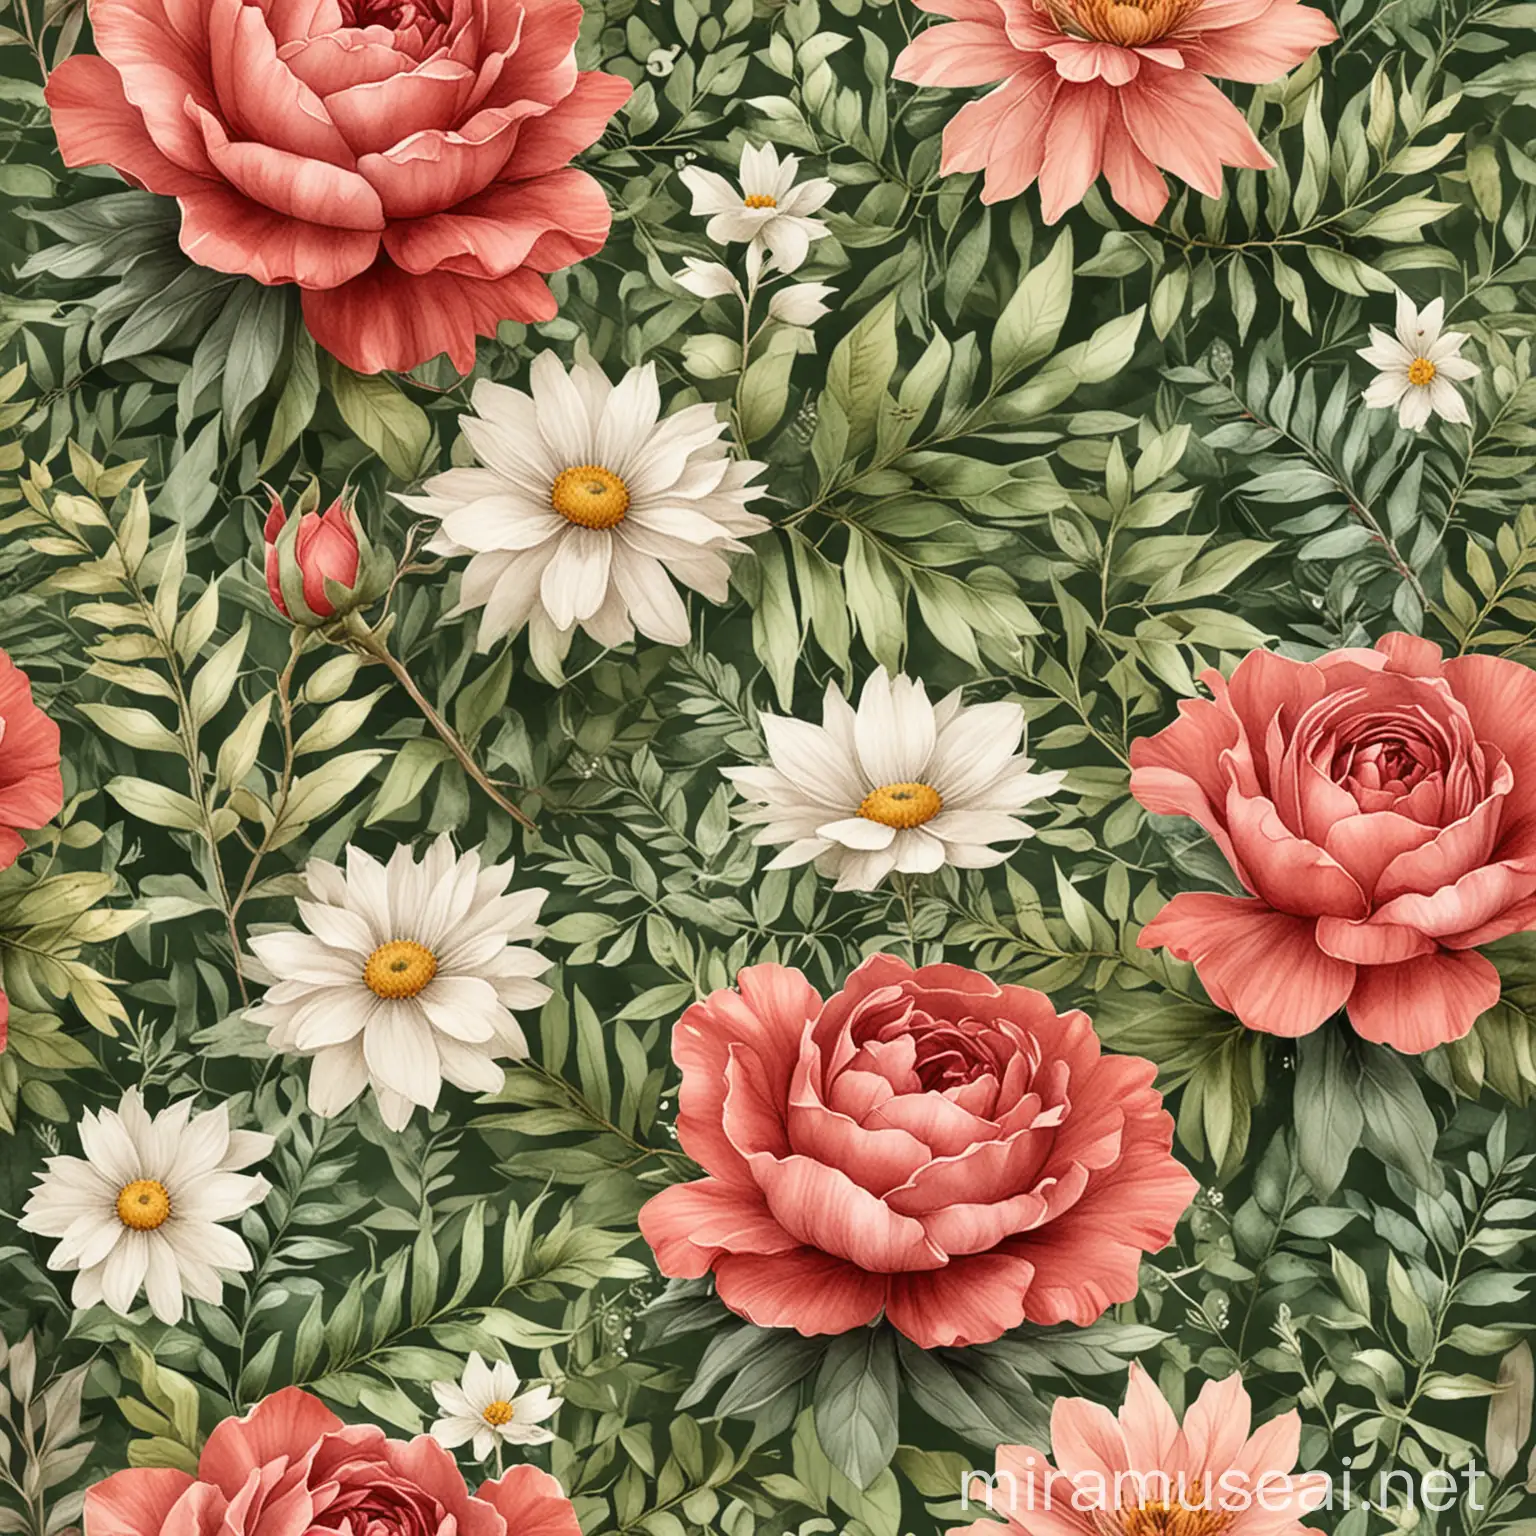 PROMPT :Create ultra HD   seamless  pattern Feature a variety of watercolor flowers, such as roses, peonies, and daisies.
Use soft, natural watercolor strokes with delicate shading and gradients.
Ensure the flowers are detailed but maintain a light and airy feel typical of watercolor paintings.
Include various types of leaves such as ferns, eucalyptus, and simple foliage.
Use shades of green that complement the red background and floral elements.
Leaves should have a soft, watercolor wash effect, with some showing fine veins and subtle color variations.
Flowers should have a range of colors, including pastel pinks, purples, and whites, to contrast and stand out against the red background. Leaves should predominantly be in various shades of green, from light sage to deep forest green.
Arrange the flowers and leaves in a balanced, natural manner, ensuring a seamless repeat with no visible edges or abrupt transitions.
Ensure a harmonious distribution of elements so the pattern feels continuous and cohesive when tiled. The background should be a rich, vibrant red that enhances the watercolor elements without overpowering them.
Consider a slightly textured or washed red background to complement the watercolor style of the floral and foliage elements.
The design should evoke a sense of elegance and natural beauty, suitable for applications such as textiles, wallpapers, 
Maintain a cohesive watercolor aesthetic throughout the pattern, ensuring all elements blend seamlessly.
